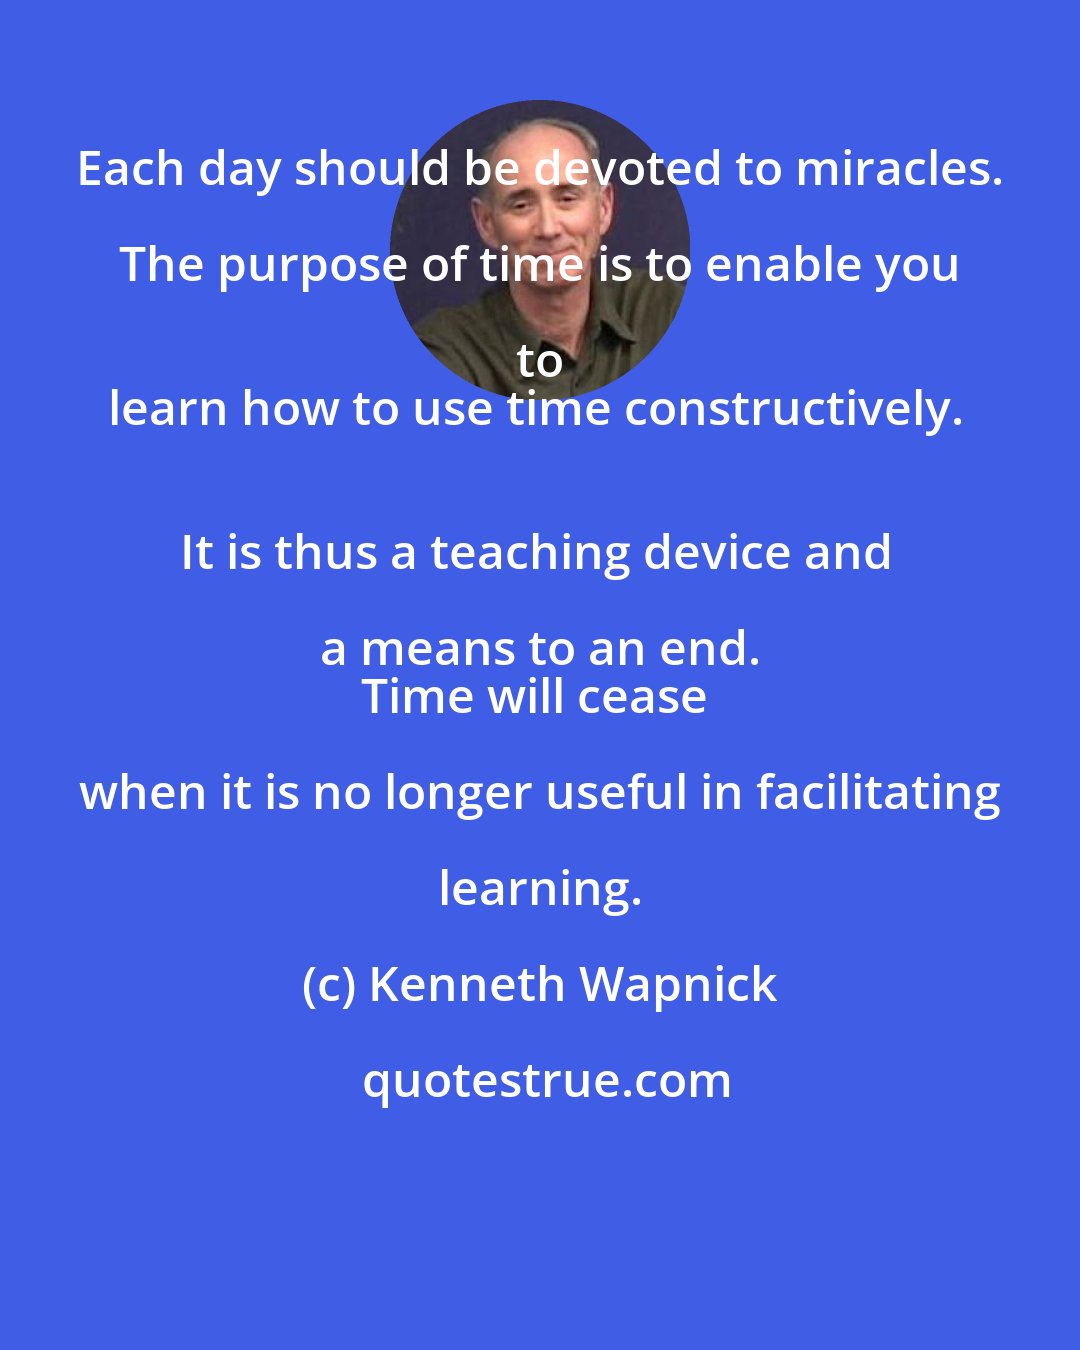 Kenneth Wapnick: Each day should be devoted to miracles. The purpose of time is to enable you to 
learn how to use time constructively. 
It is thus a teaching device and a means to an end. 
Time will cease when it is no longer useful in facilitating learning.